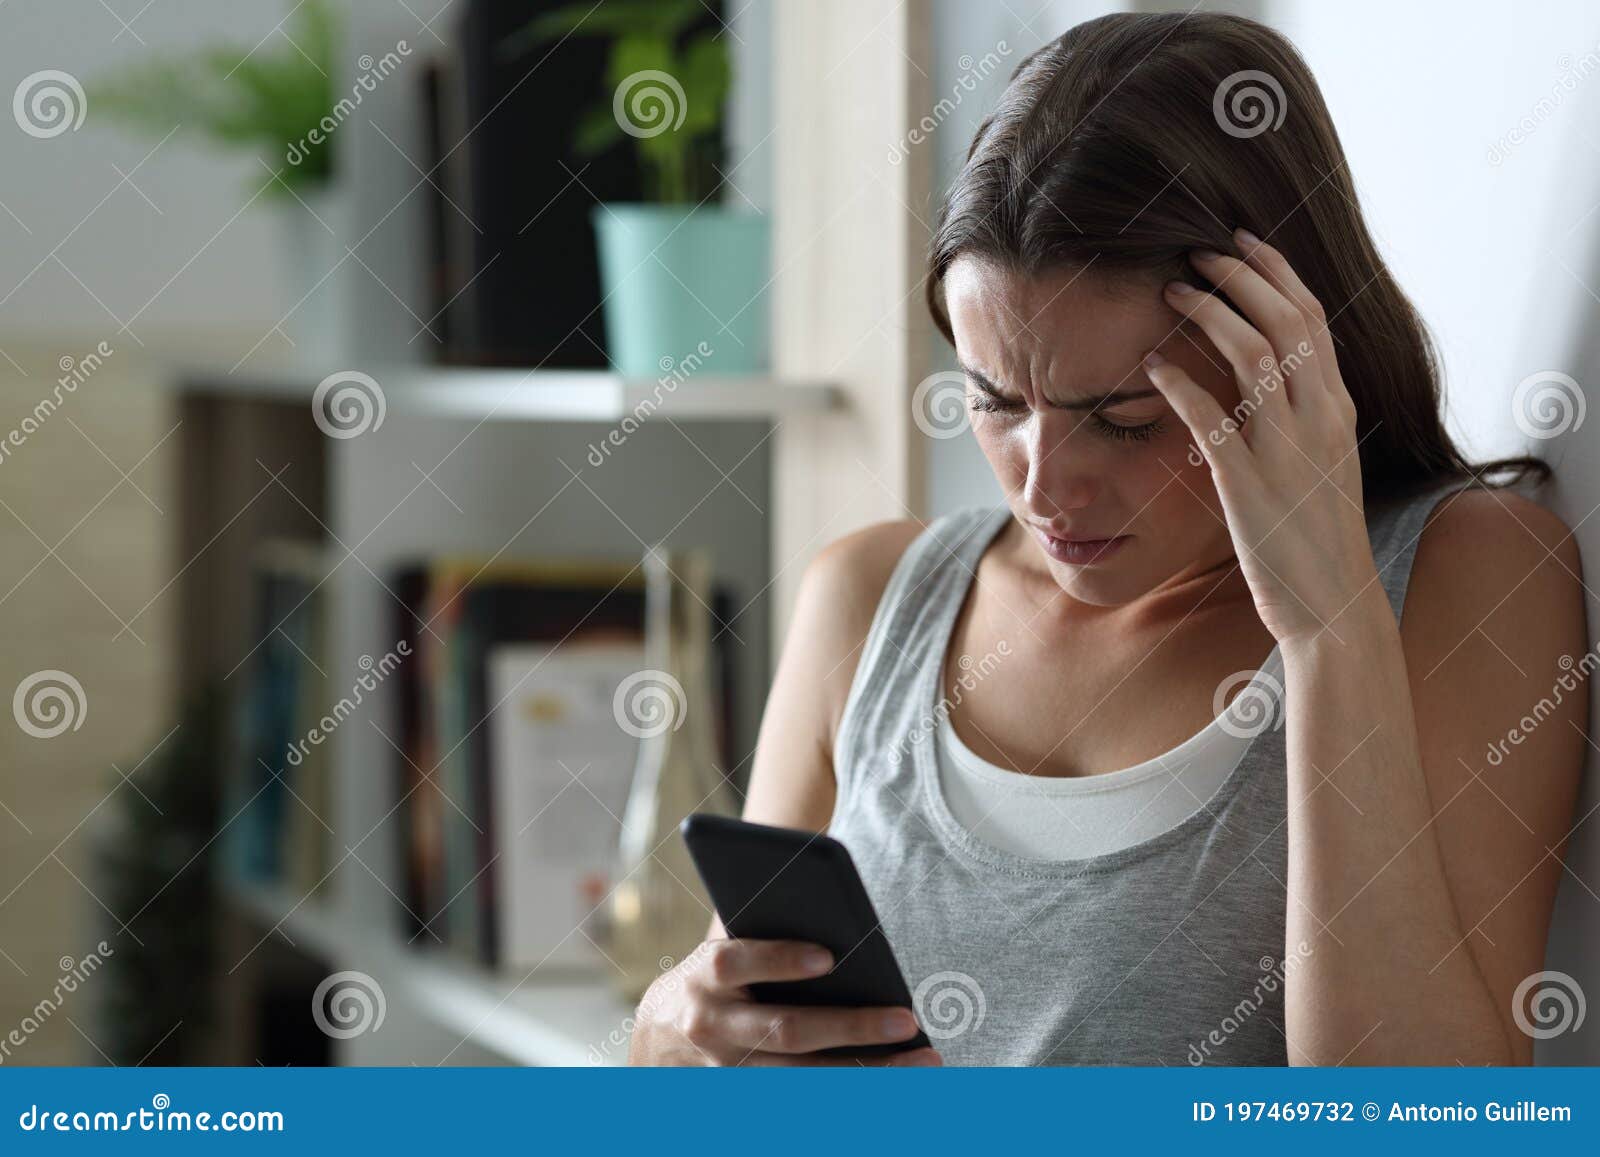 Sad Teen Checking Smart Phone At Home In The Night Stock Photo - Image